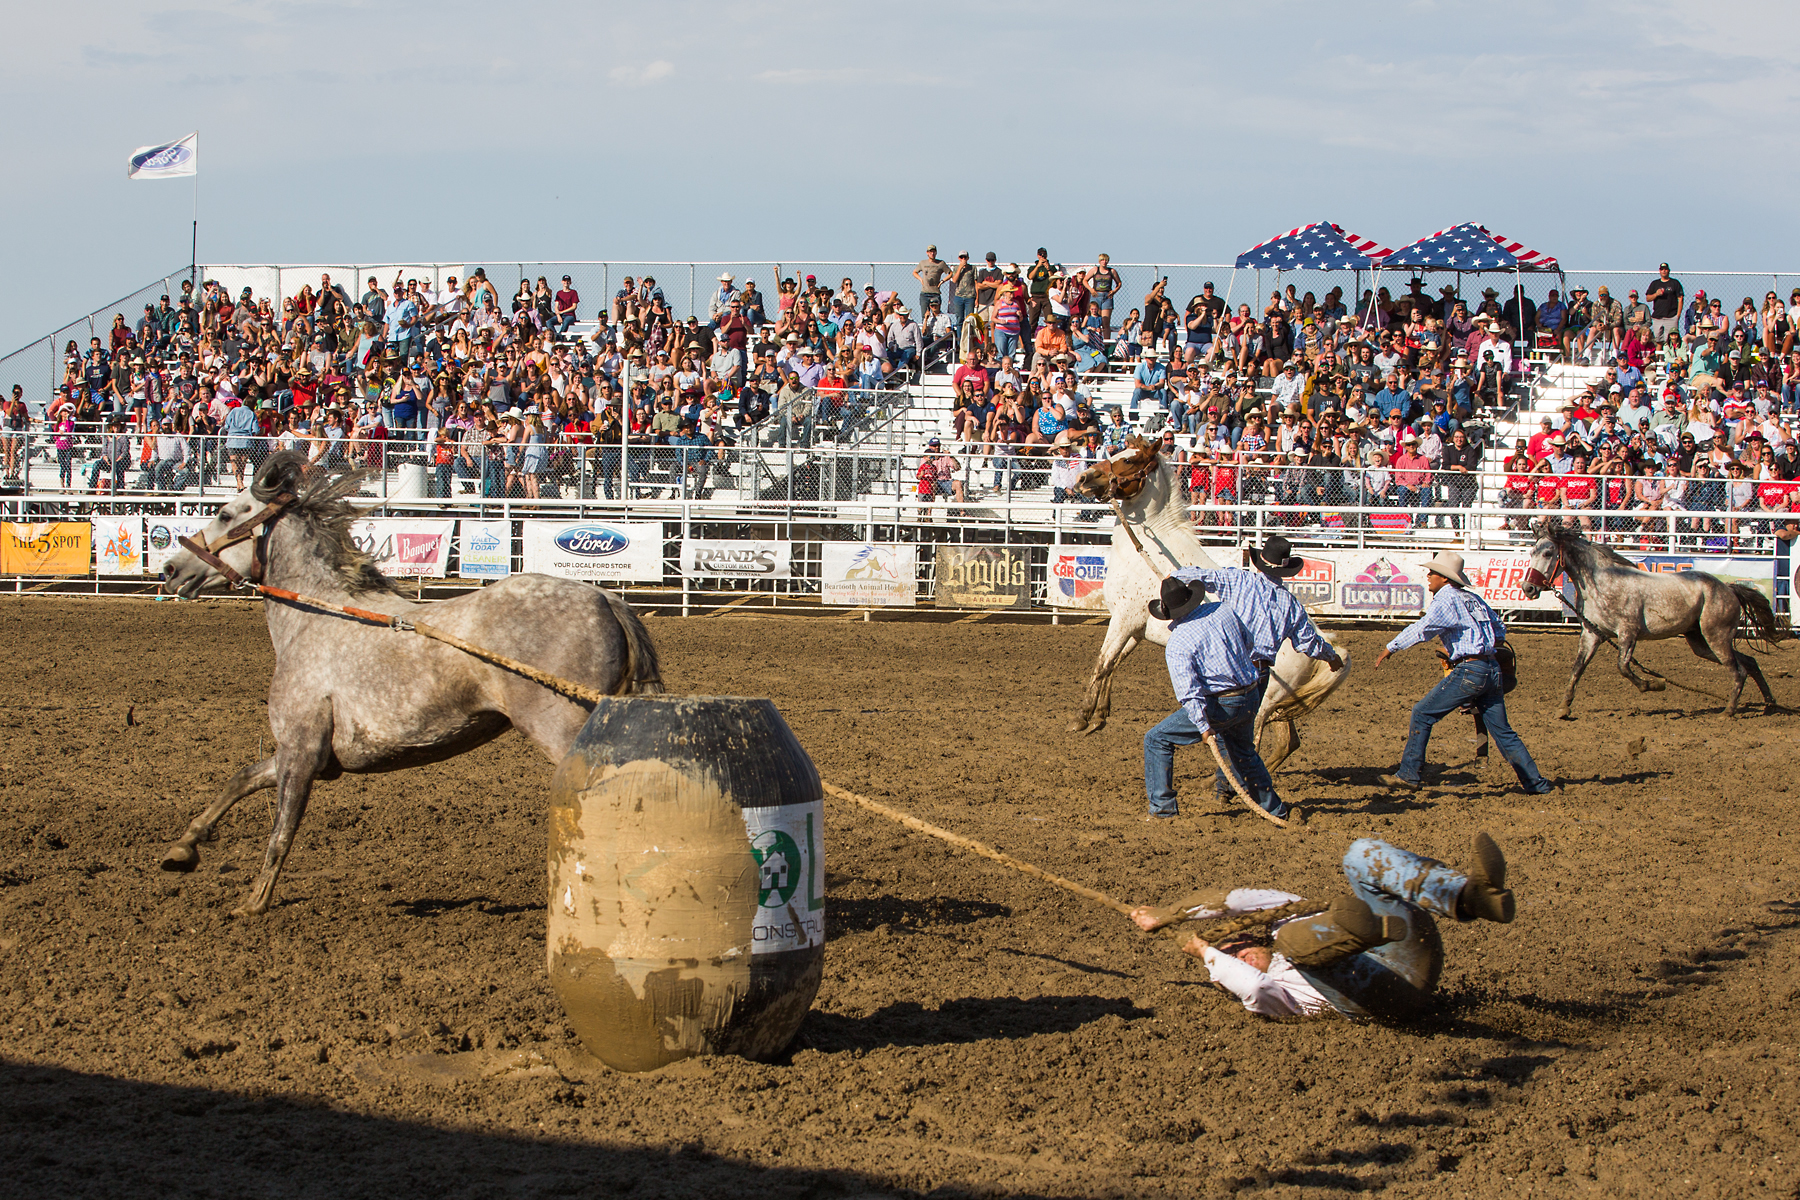 Wild horse racing at Home of Champions Rodeo, Red Lodge, MT.  Click for next photo.